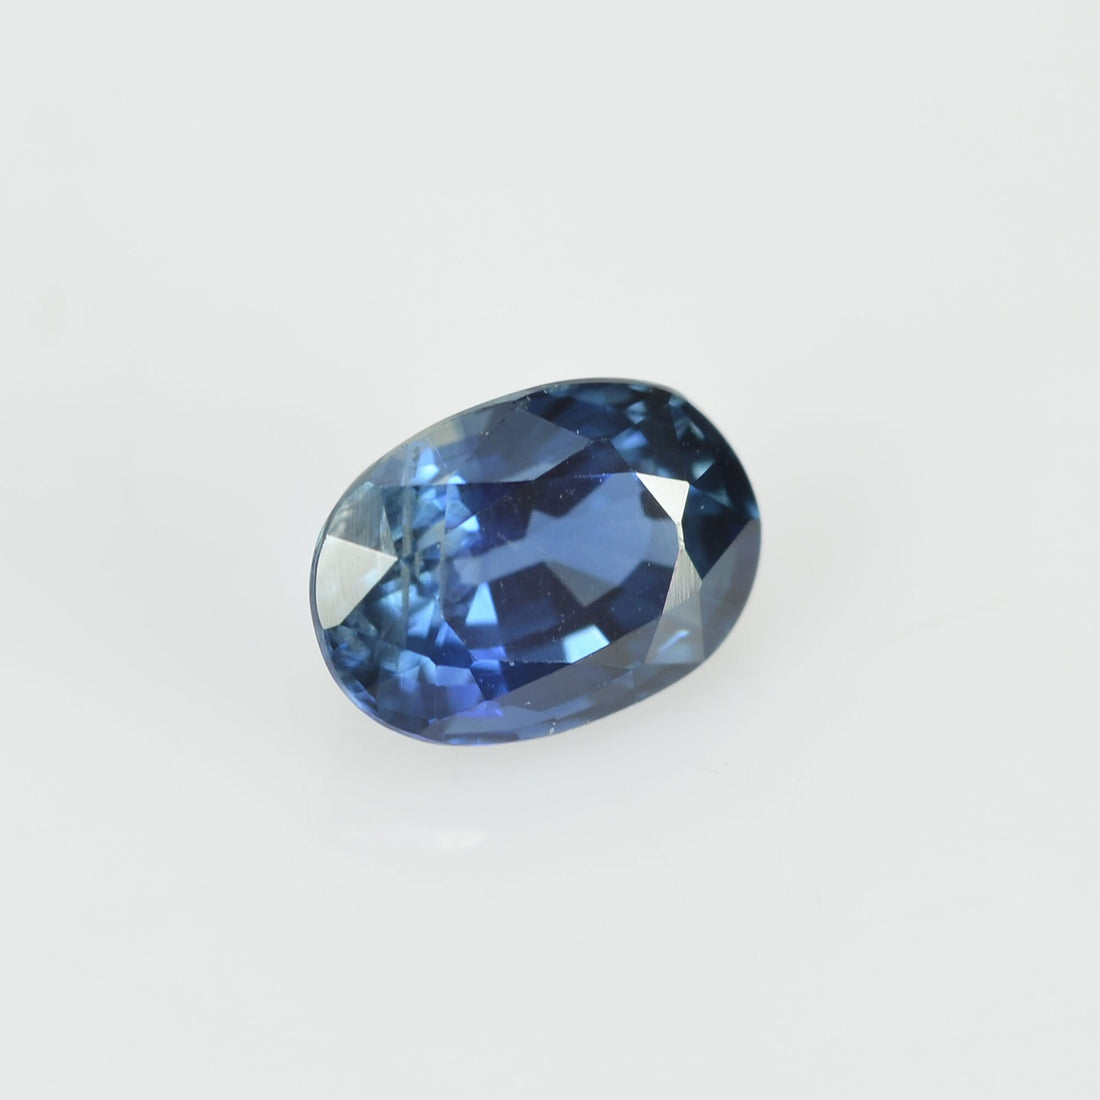 0.70 cts Natural Blue Sapphire Loose Gemstone Oval Cut